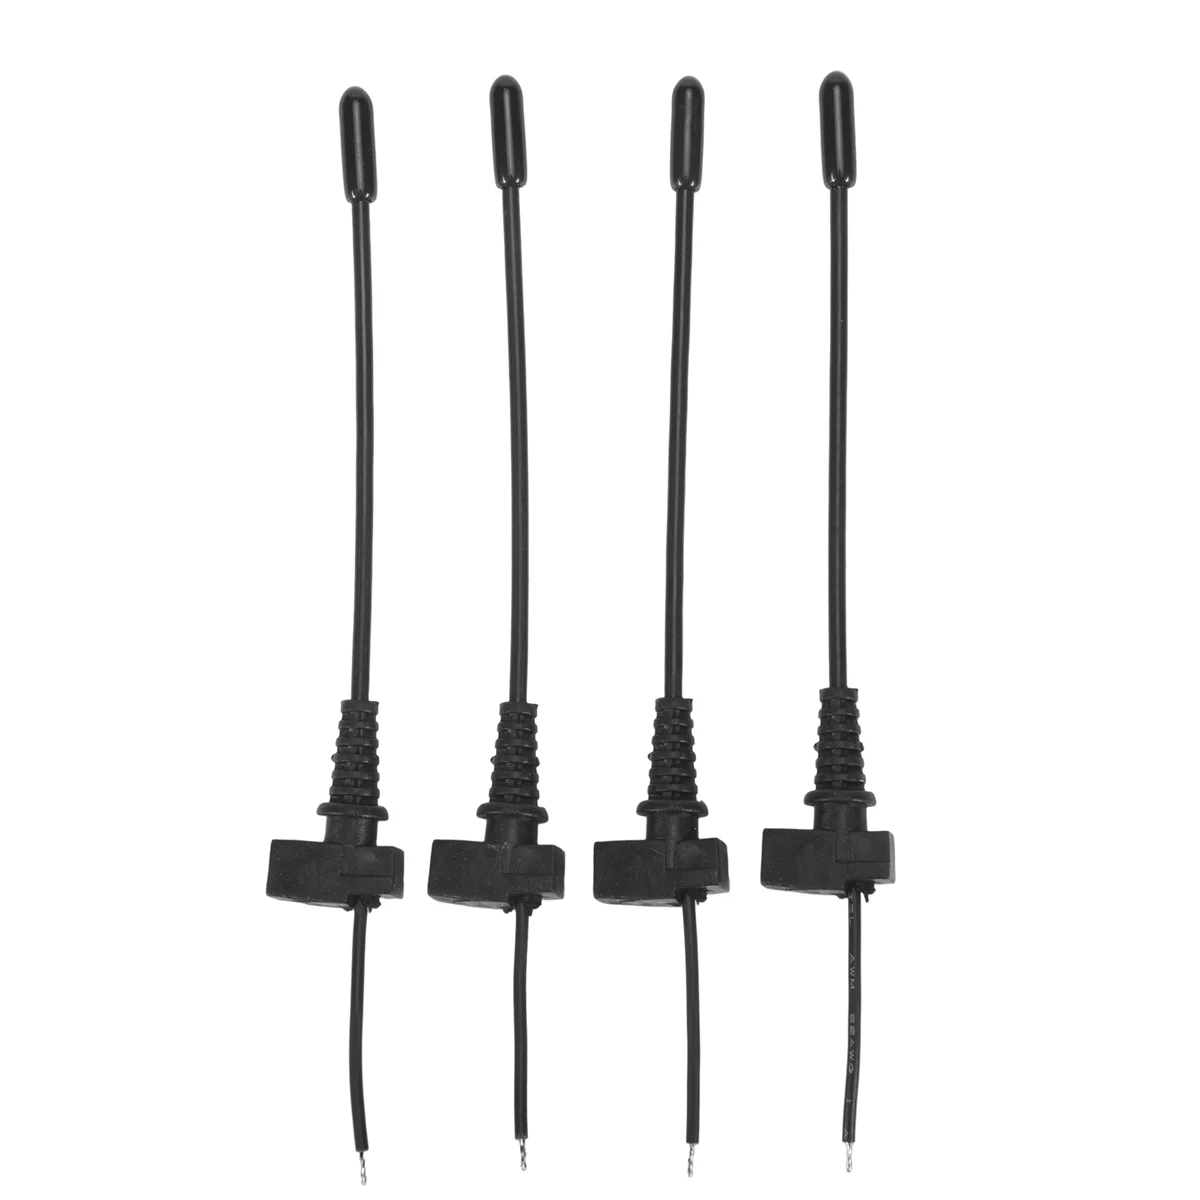 

4 Pcs Microphone Antenna Suitable for EW100G2/100G3 Wireless Microphone Bodypack Repair Mic Part Replace